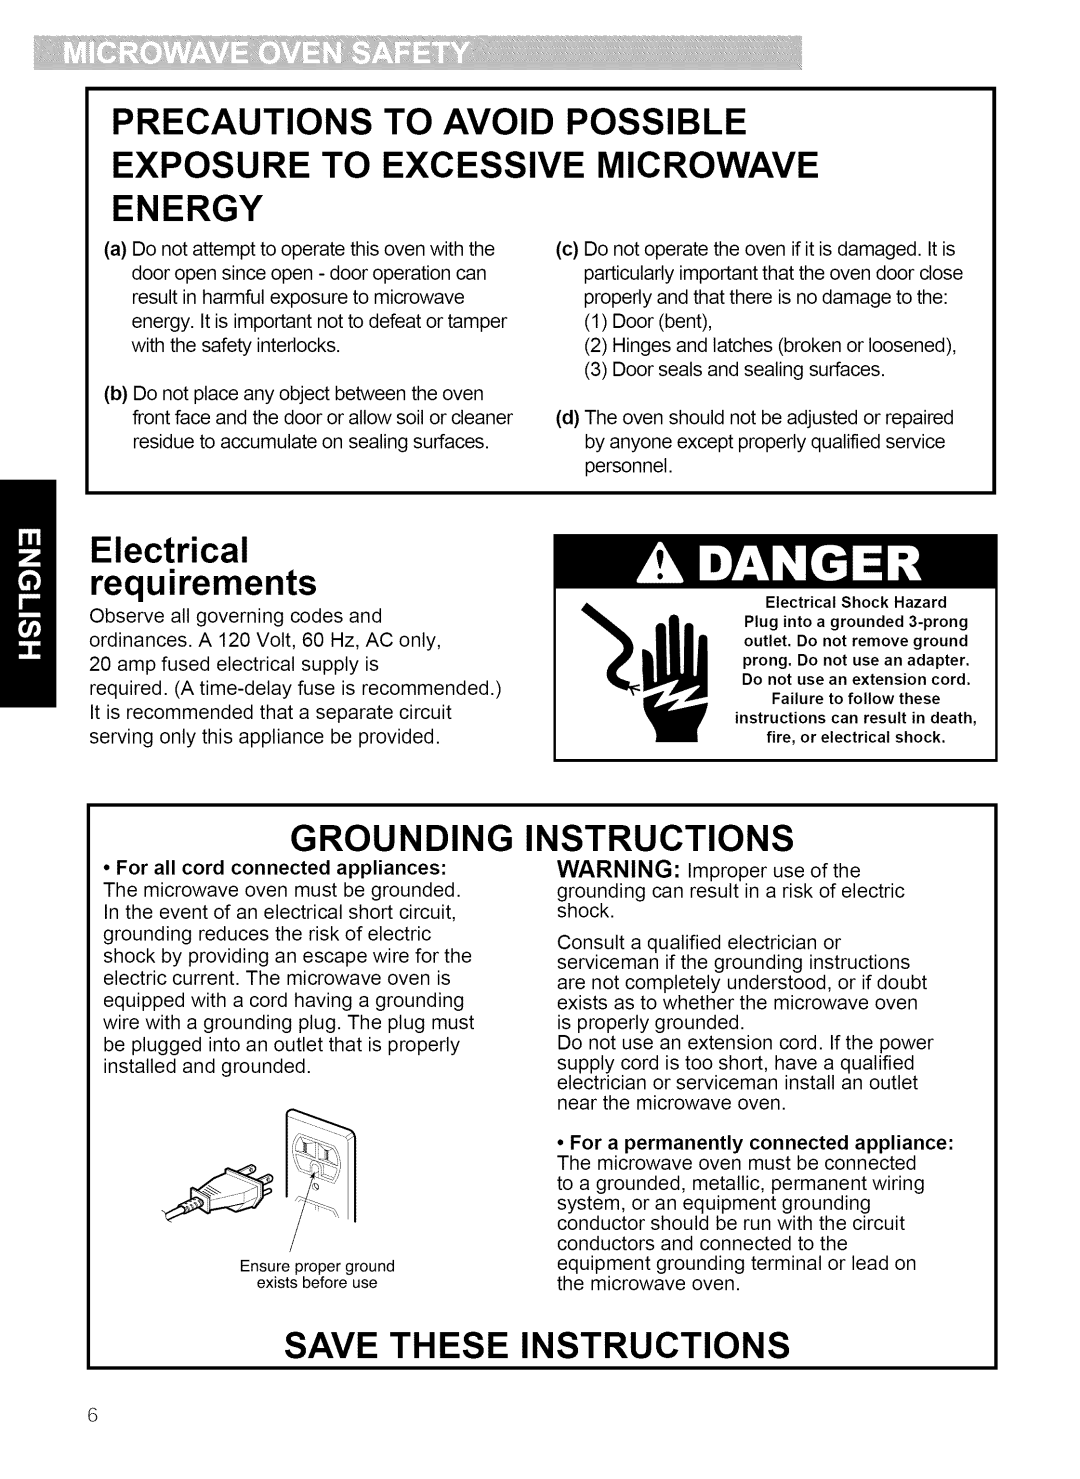 Kenmore 721.80862 manual Precautions To Avoid Possible, Exposure To Excessive Microwave Energy, Electrical requirements 